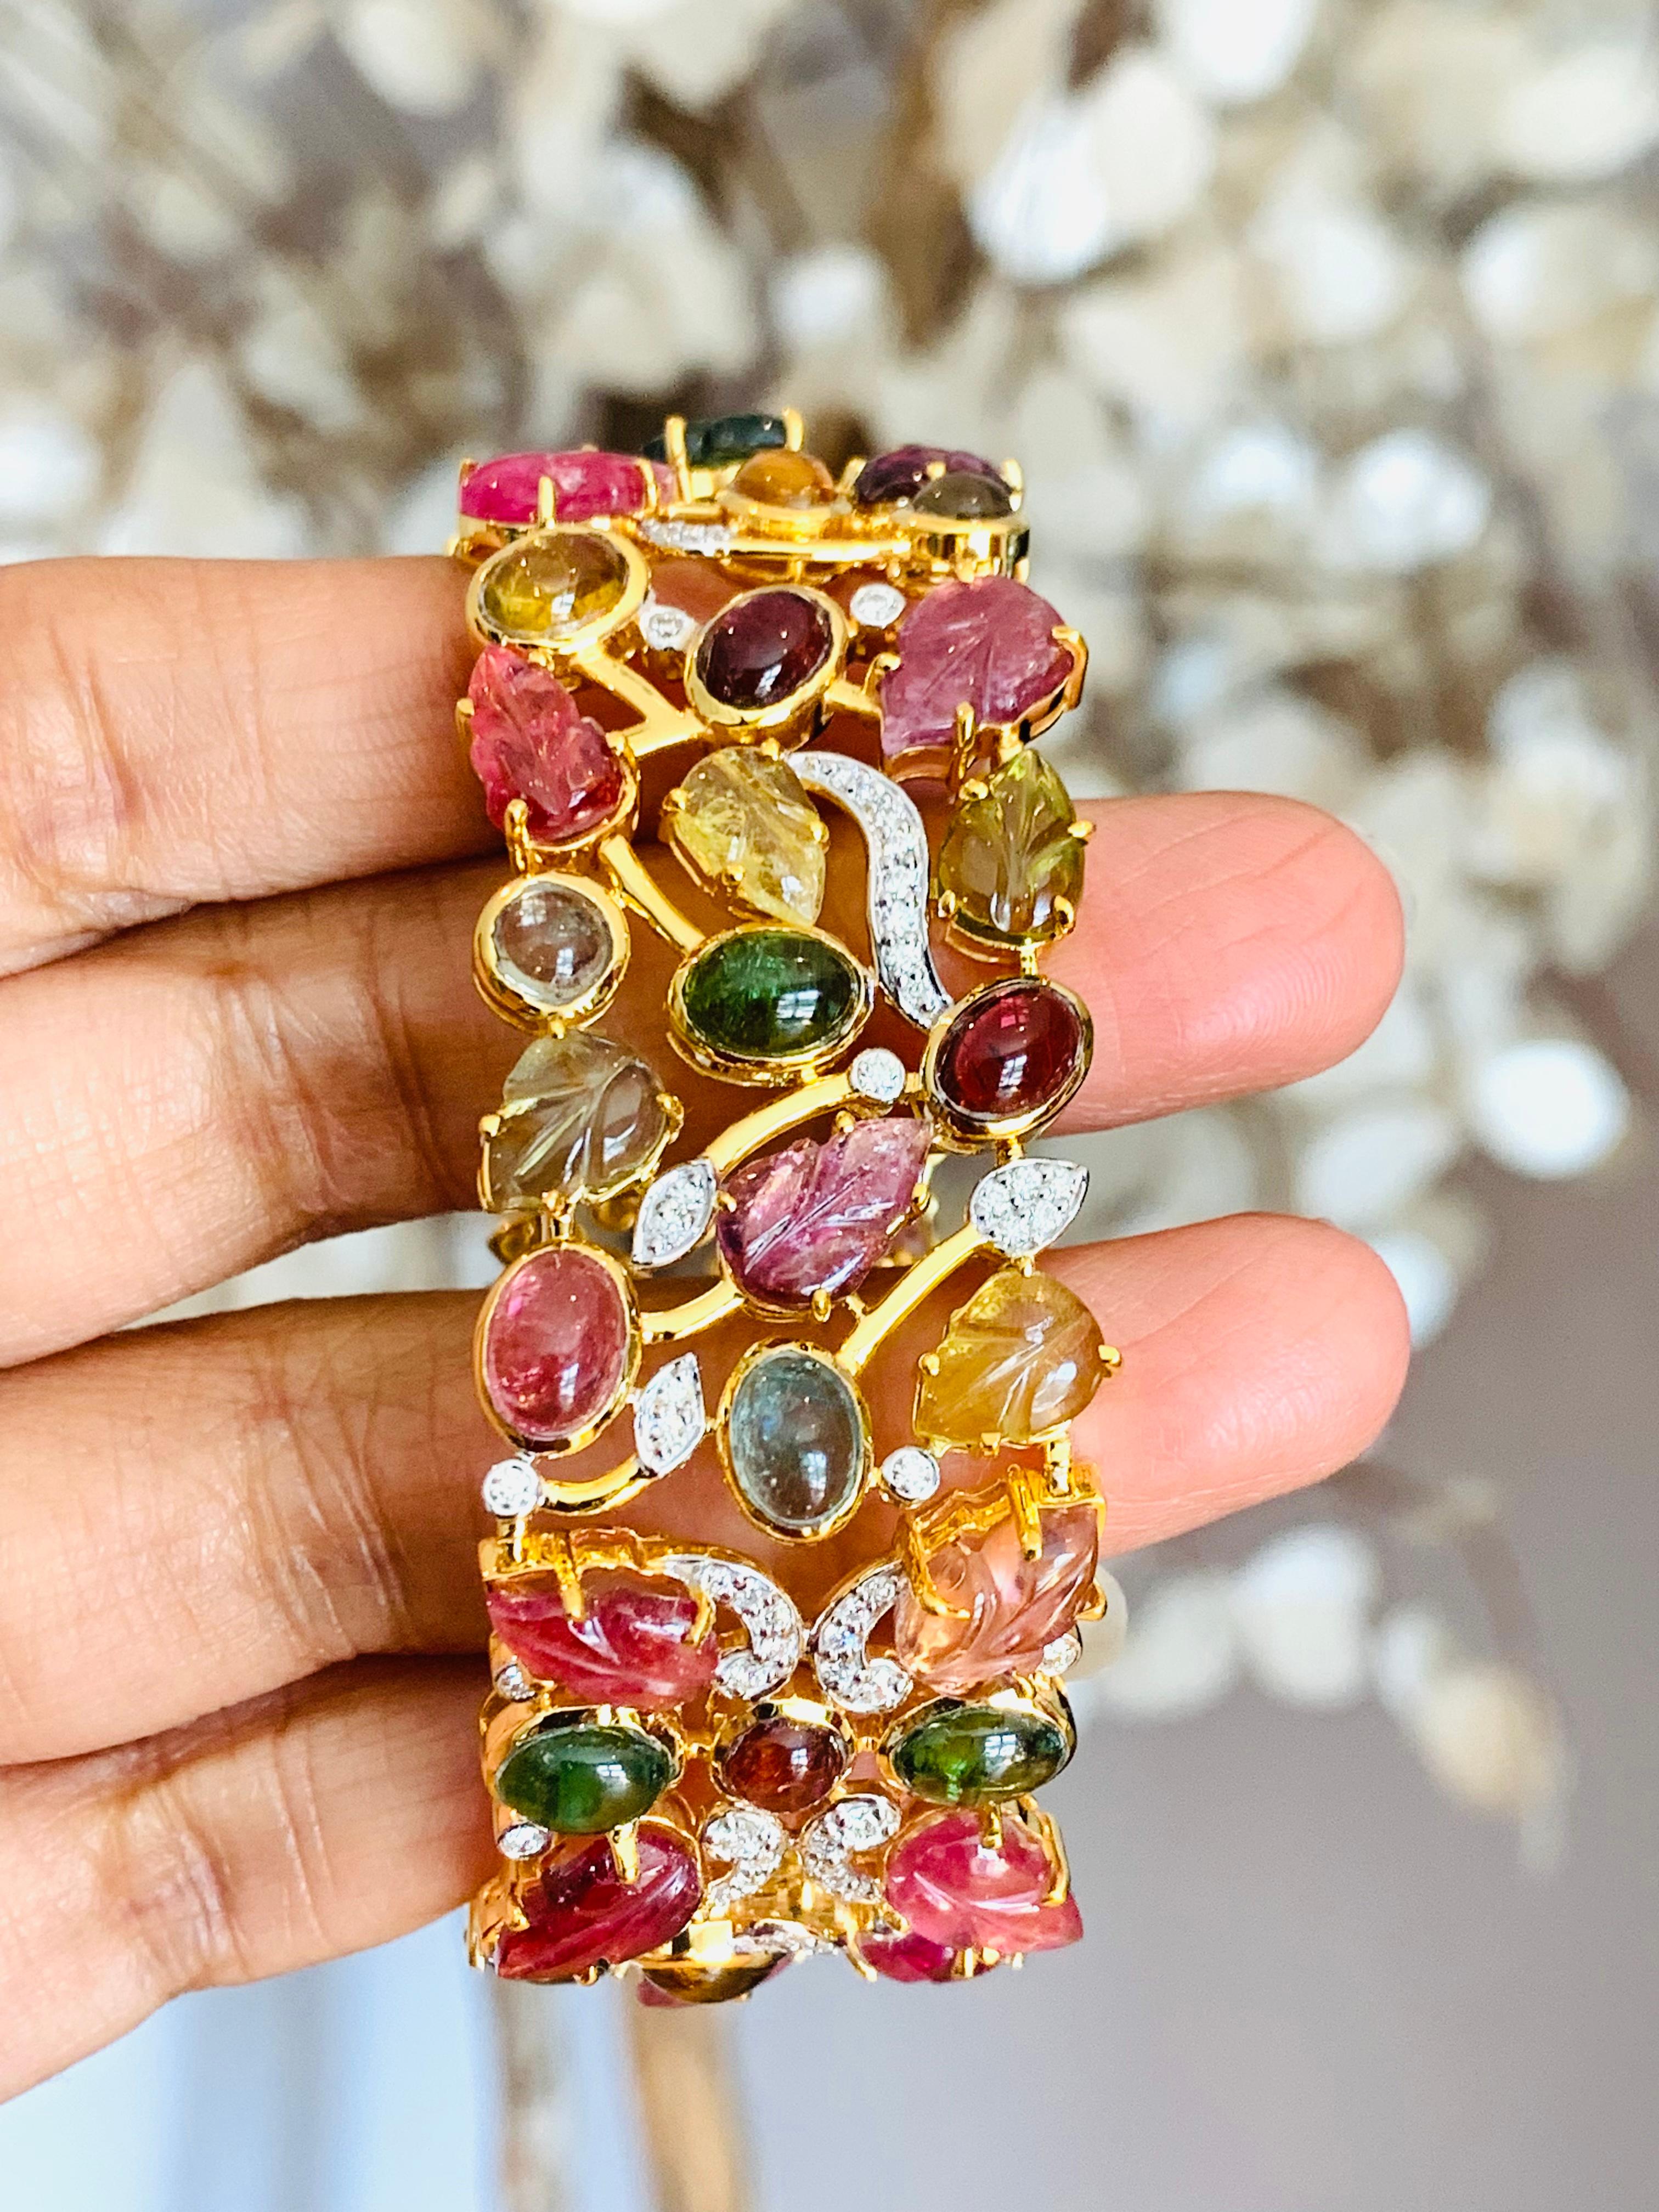 A stunning statement cuff handmade in 14K gold and hand carved leaf motifs set throughout. It is set in 55.74 carats tourmaline, ruby, sapphire & 1.74 carats of sparkling diamonds. Clasp Closure

FOLLOW  MEGHNA JEWELS storefront to view the latest